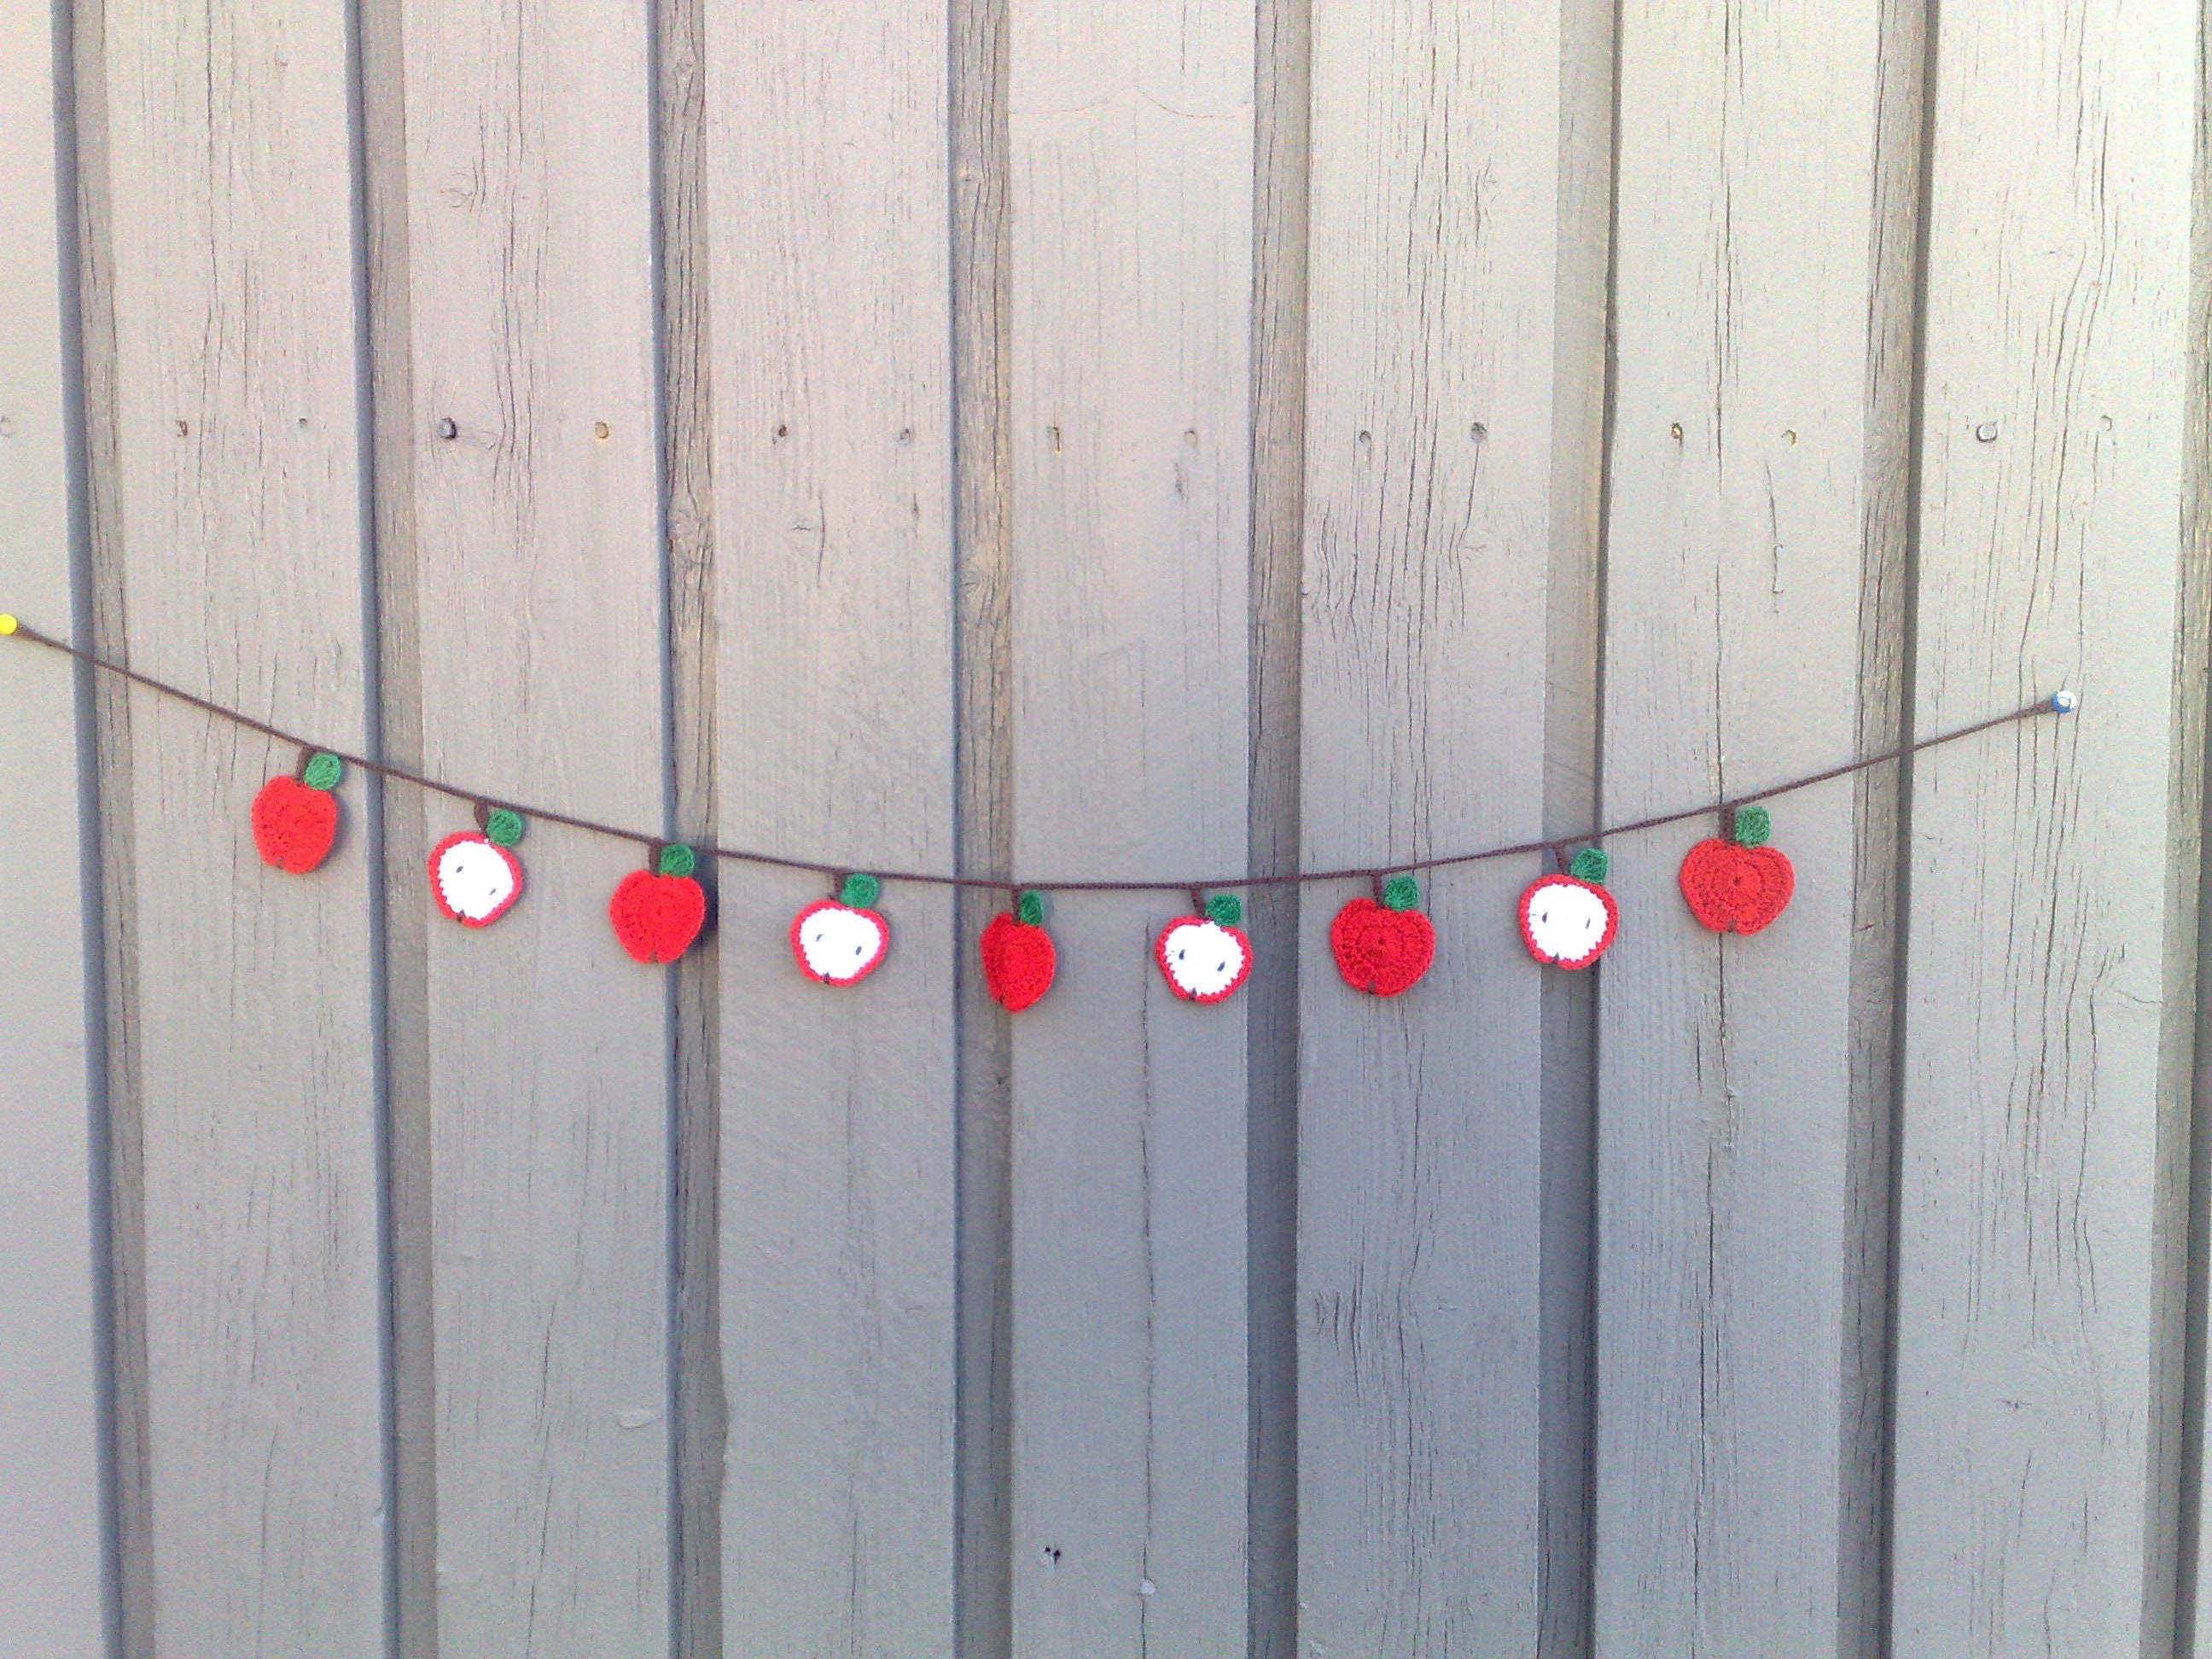 Crocheted garland with red apples